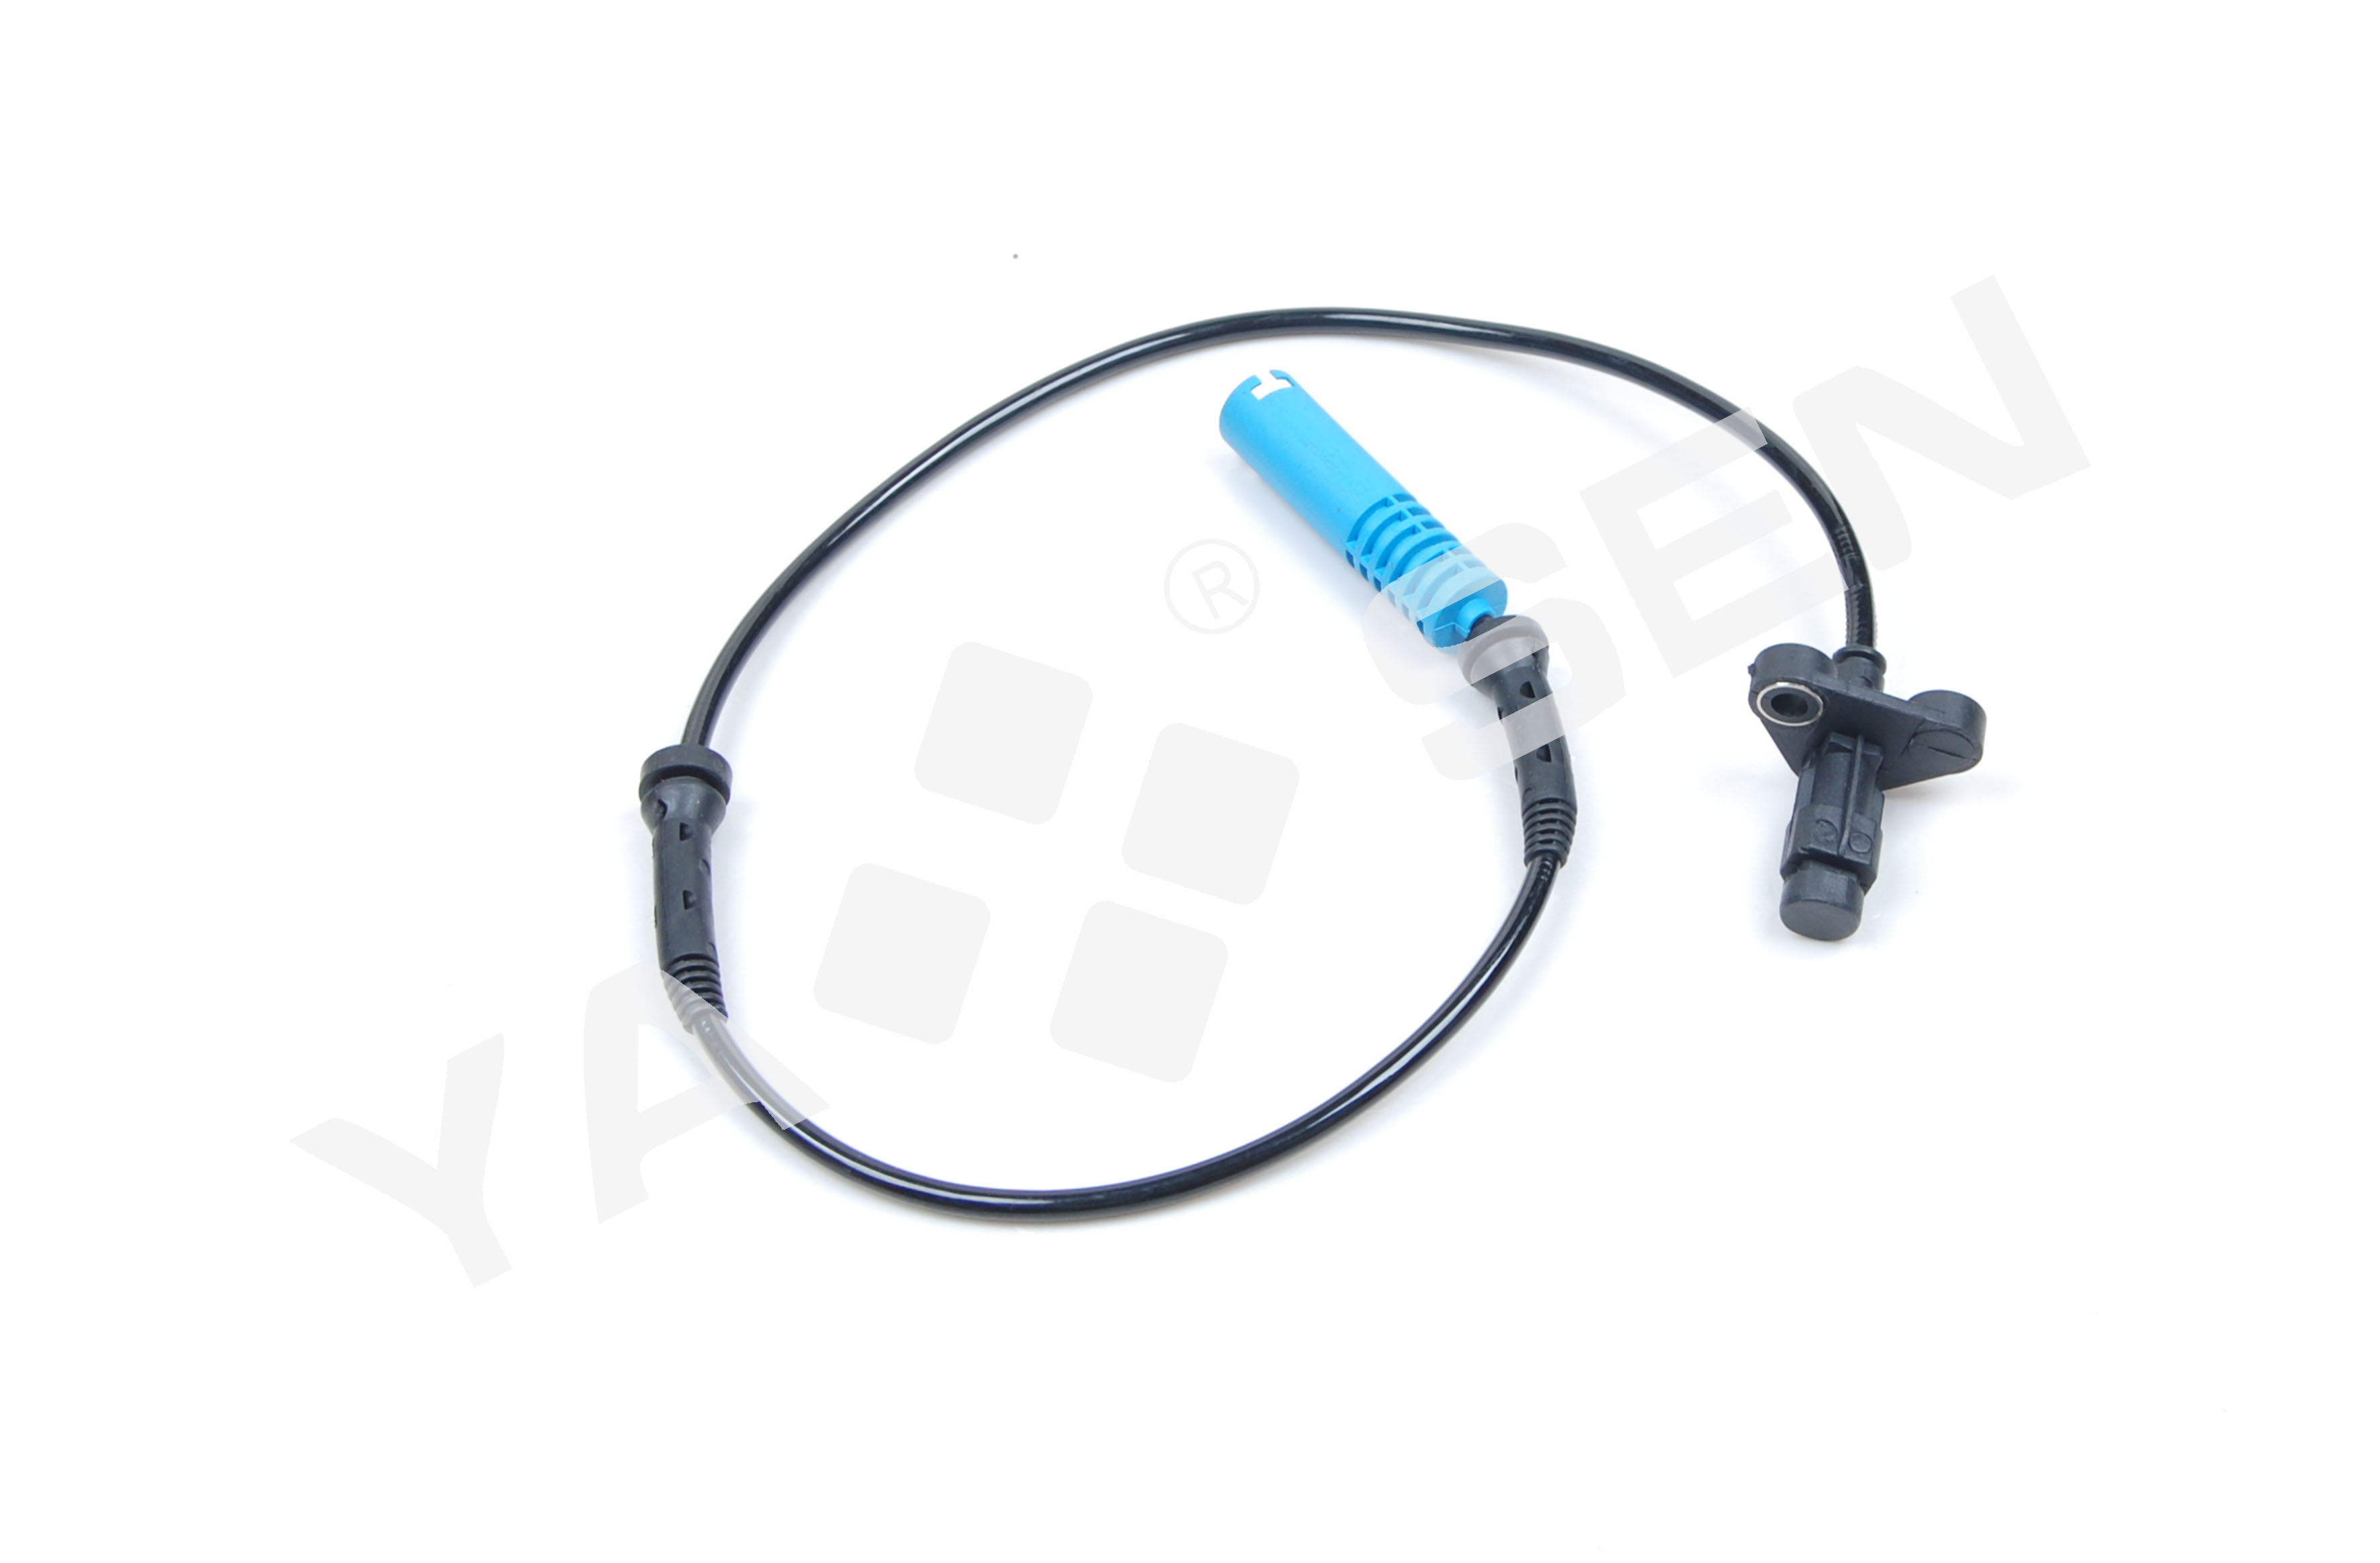 ABS Wheel Speed Sensor for BMW, 34526756375 34520025723 34521165534 0844047 SS20007 970119 5S10529